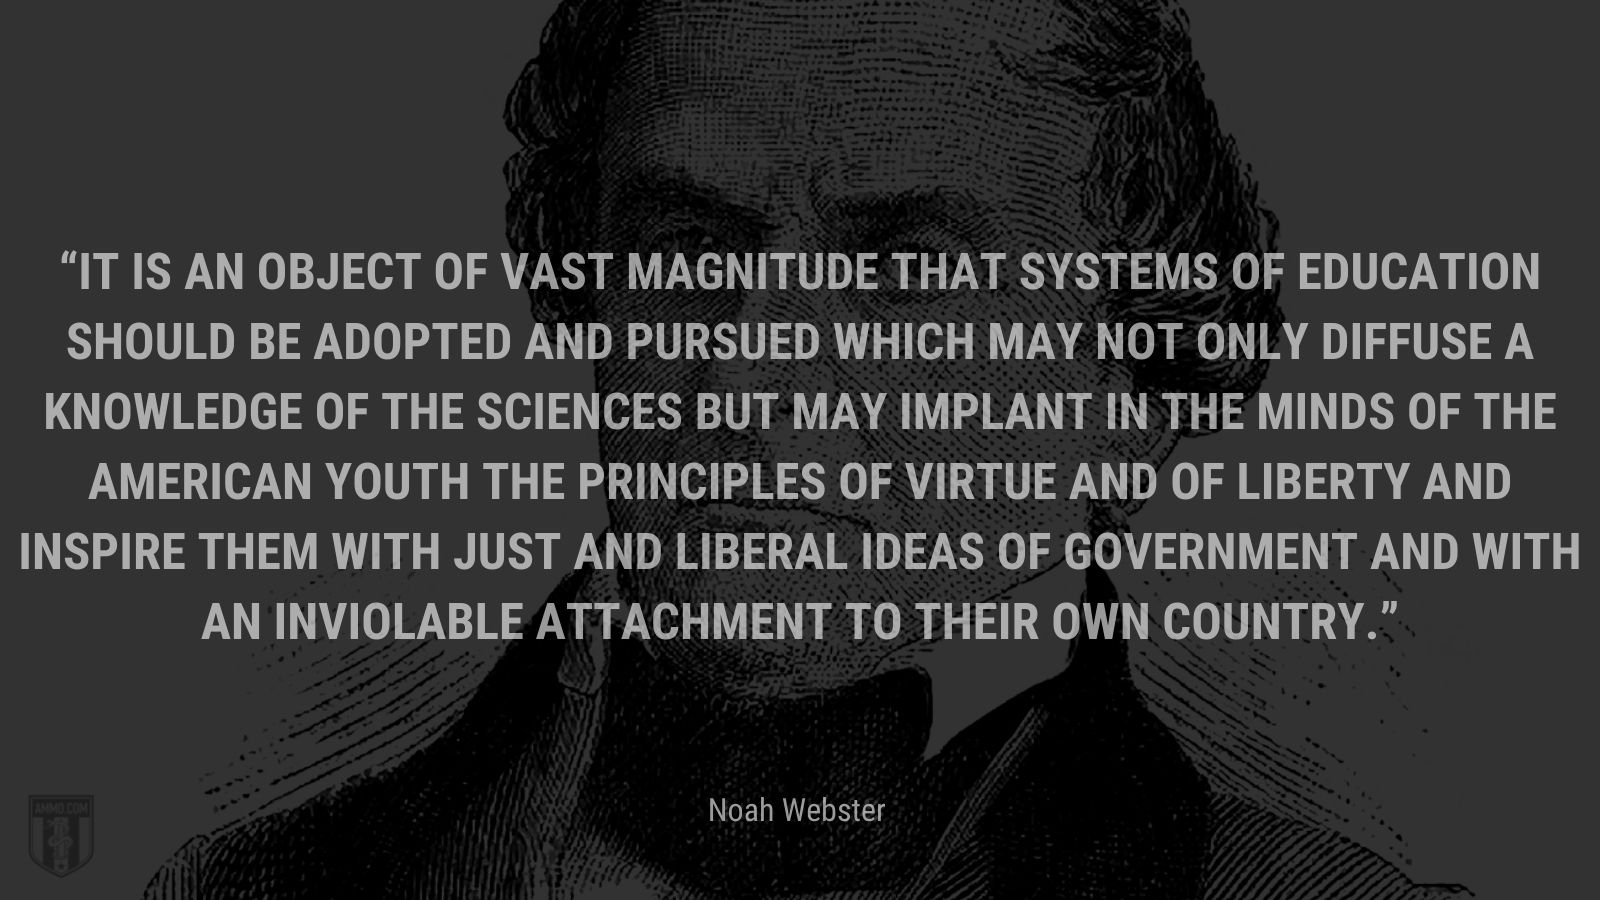 “It is an object of vast magnitude that systems of education should be adopted and pursued which may not only diffuse a knowledge of the sciences but may implant in the minds of the American youth the principles of virtue and of liberty and inspire them with just and liberal ideas of government and with an inviolable attachment to their own country.” - Noah Webster